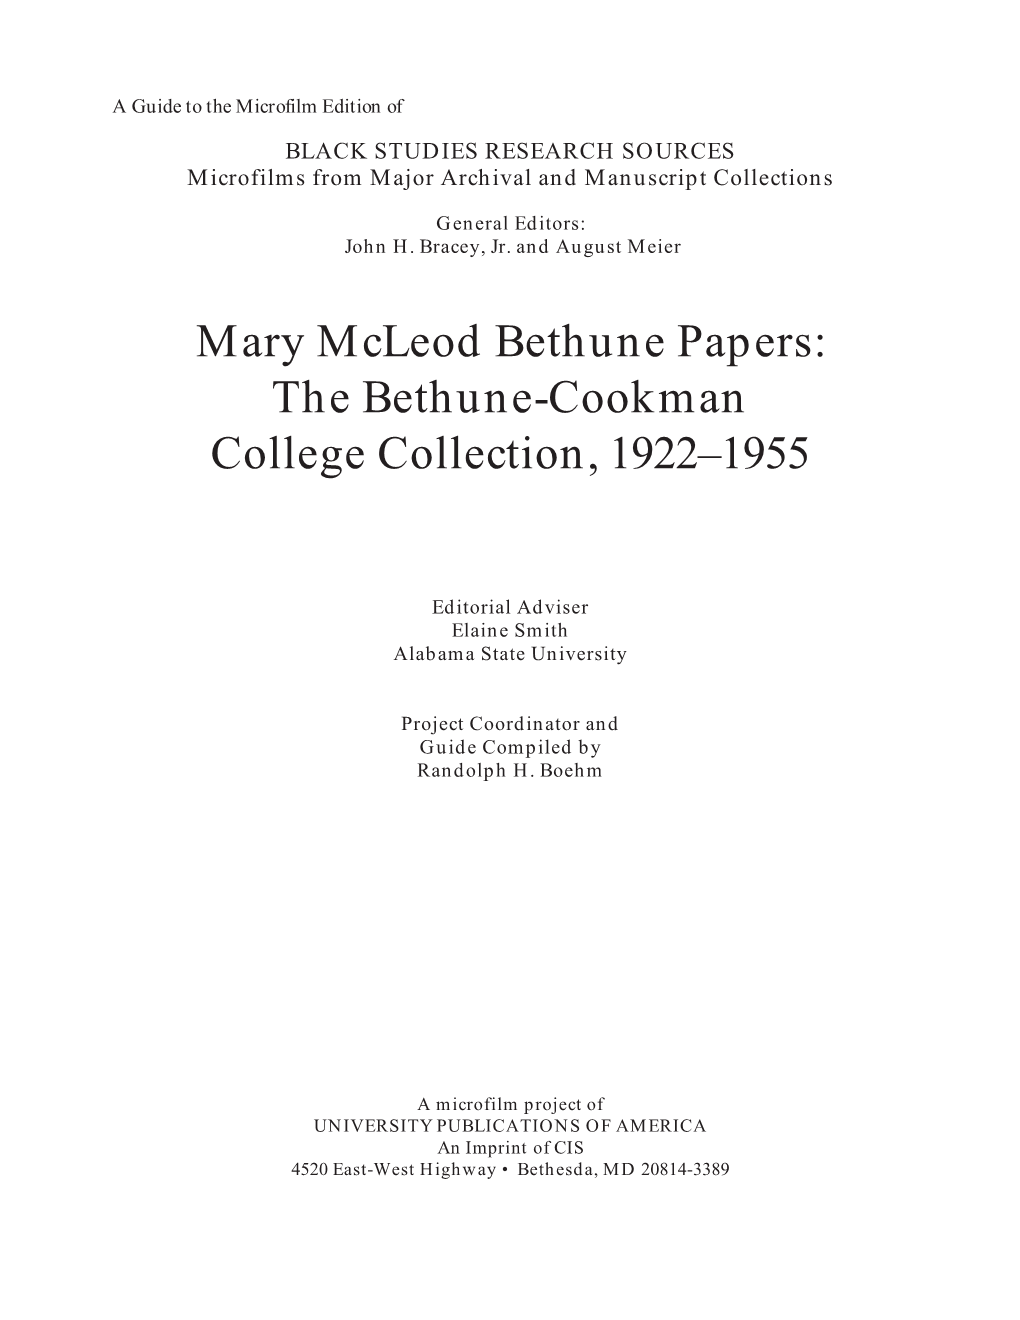 Mary Mcleod Bethune Papers: the Bethune-Cookman College Collection, 1922–1955